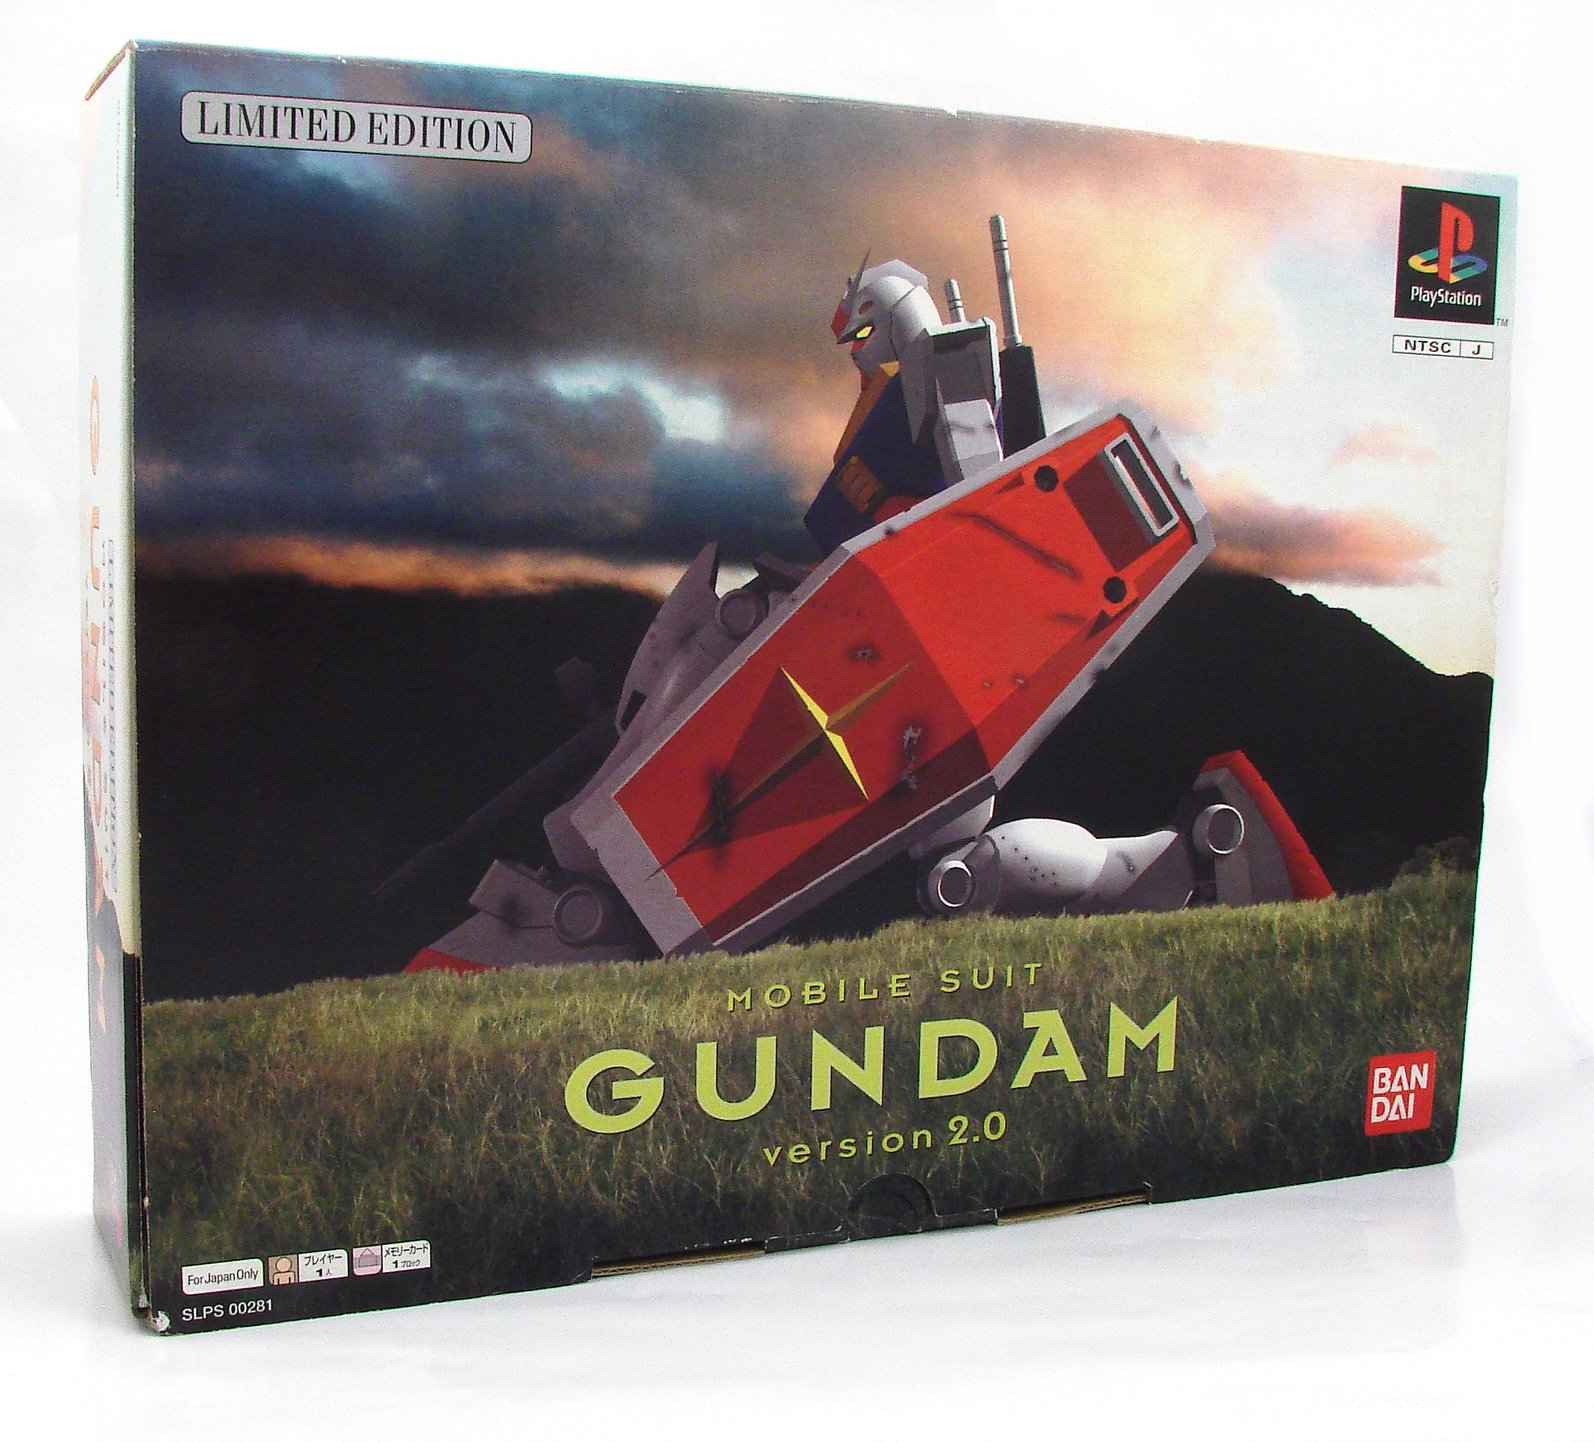 Mobile Suit Gundam Version 2.0 [Limited Edition] for PlayStation